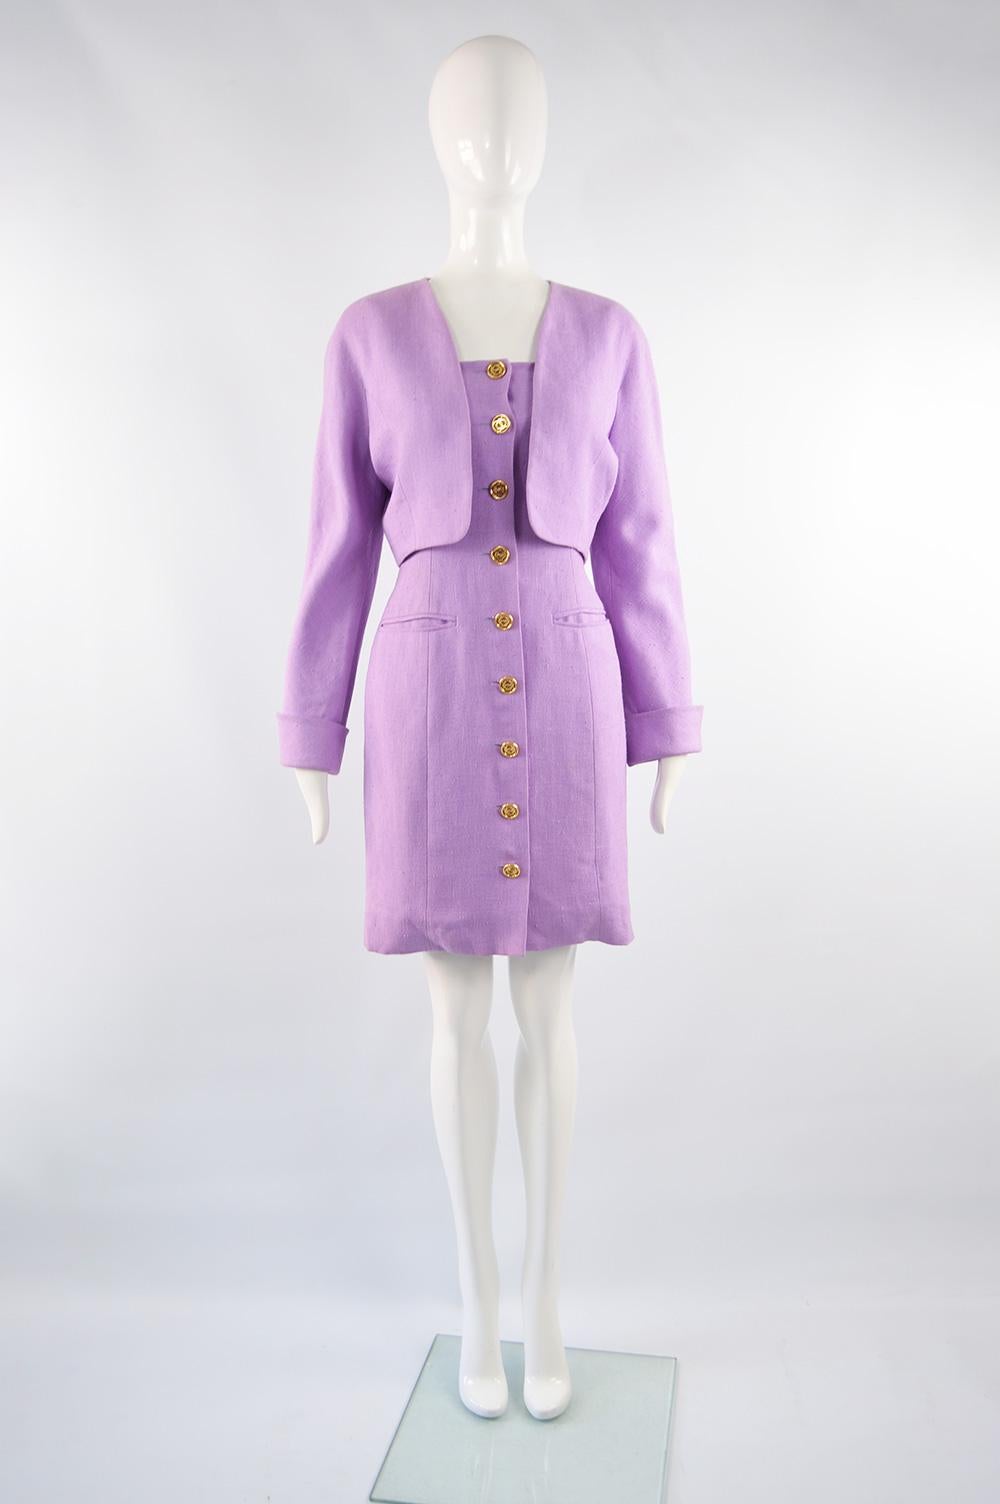 A chic vintage Loewe dress suit from the 80s in a lavender coloured linen with Loewe logo buttons, shoulder pads in the bolero jacket and turn back cuffs. The dress is lightly boned making it perfect for a summer party. 

Size: Marked vintage 40 but